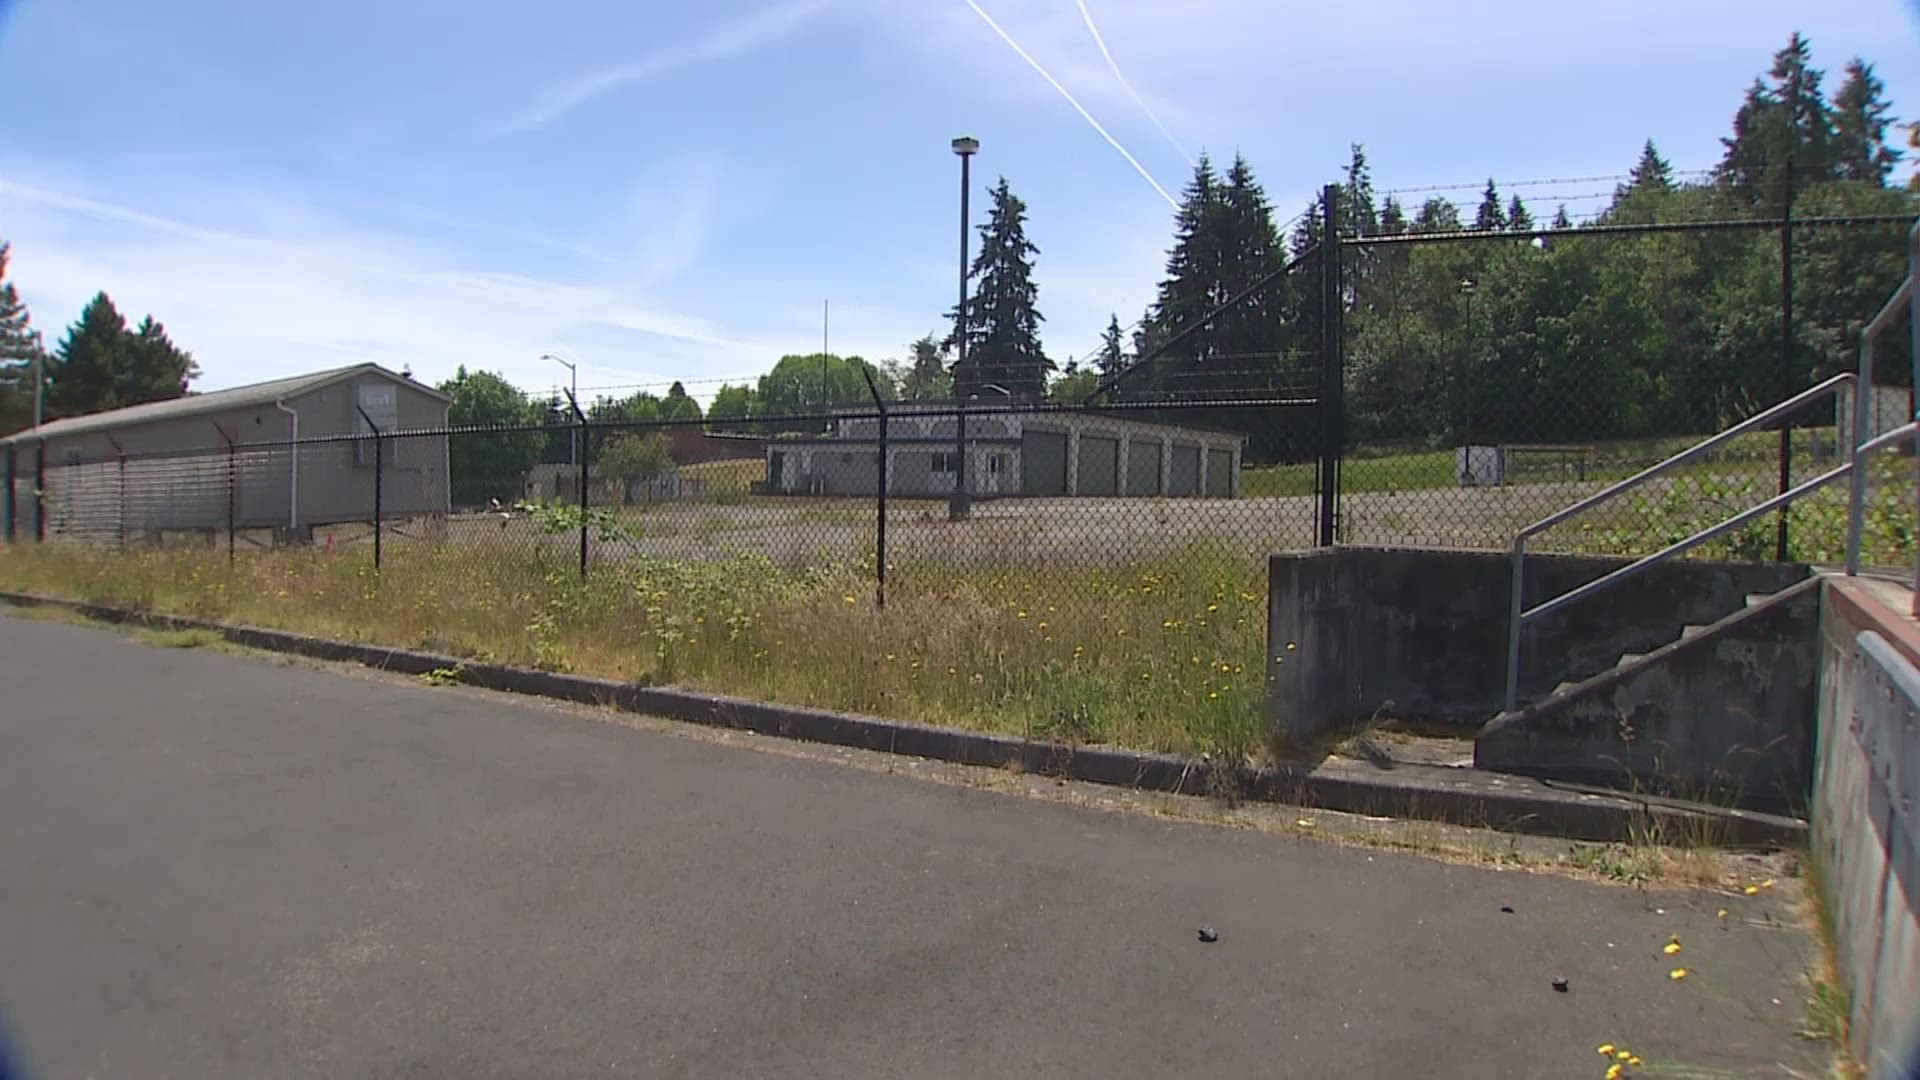 Seattle City Council is moving forward with plans to develop Fort Lawton into an affordable housing complex with parks and recreational space. The Committee on Housing, Health, Energy & Workers’ Rights unanimously passed the legislation Thursday, and the full council is expected to vote on it during its Monday meeting. KING 5's Amy Moreno reports.